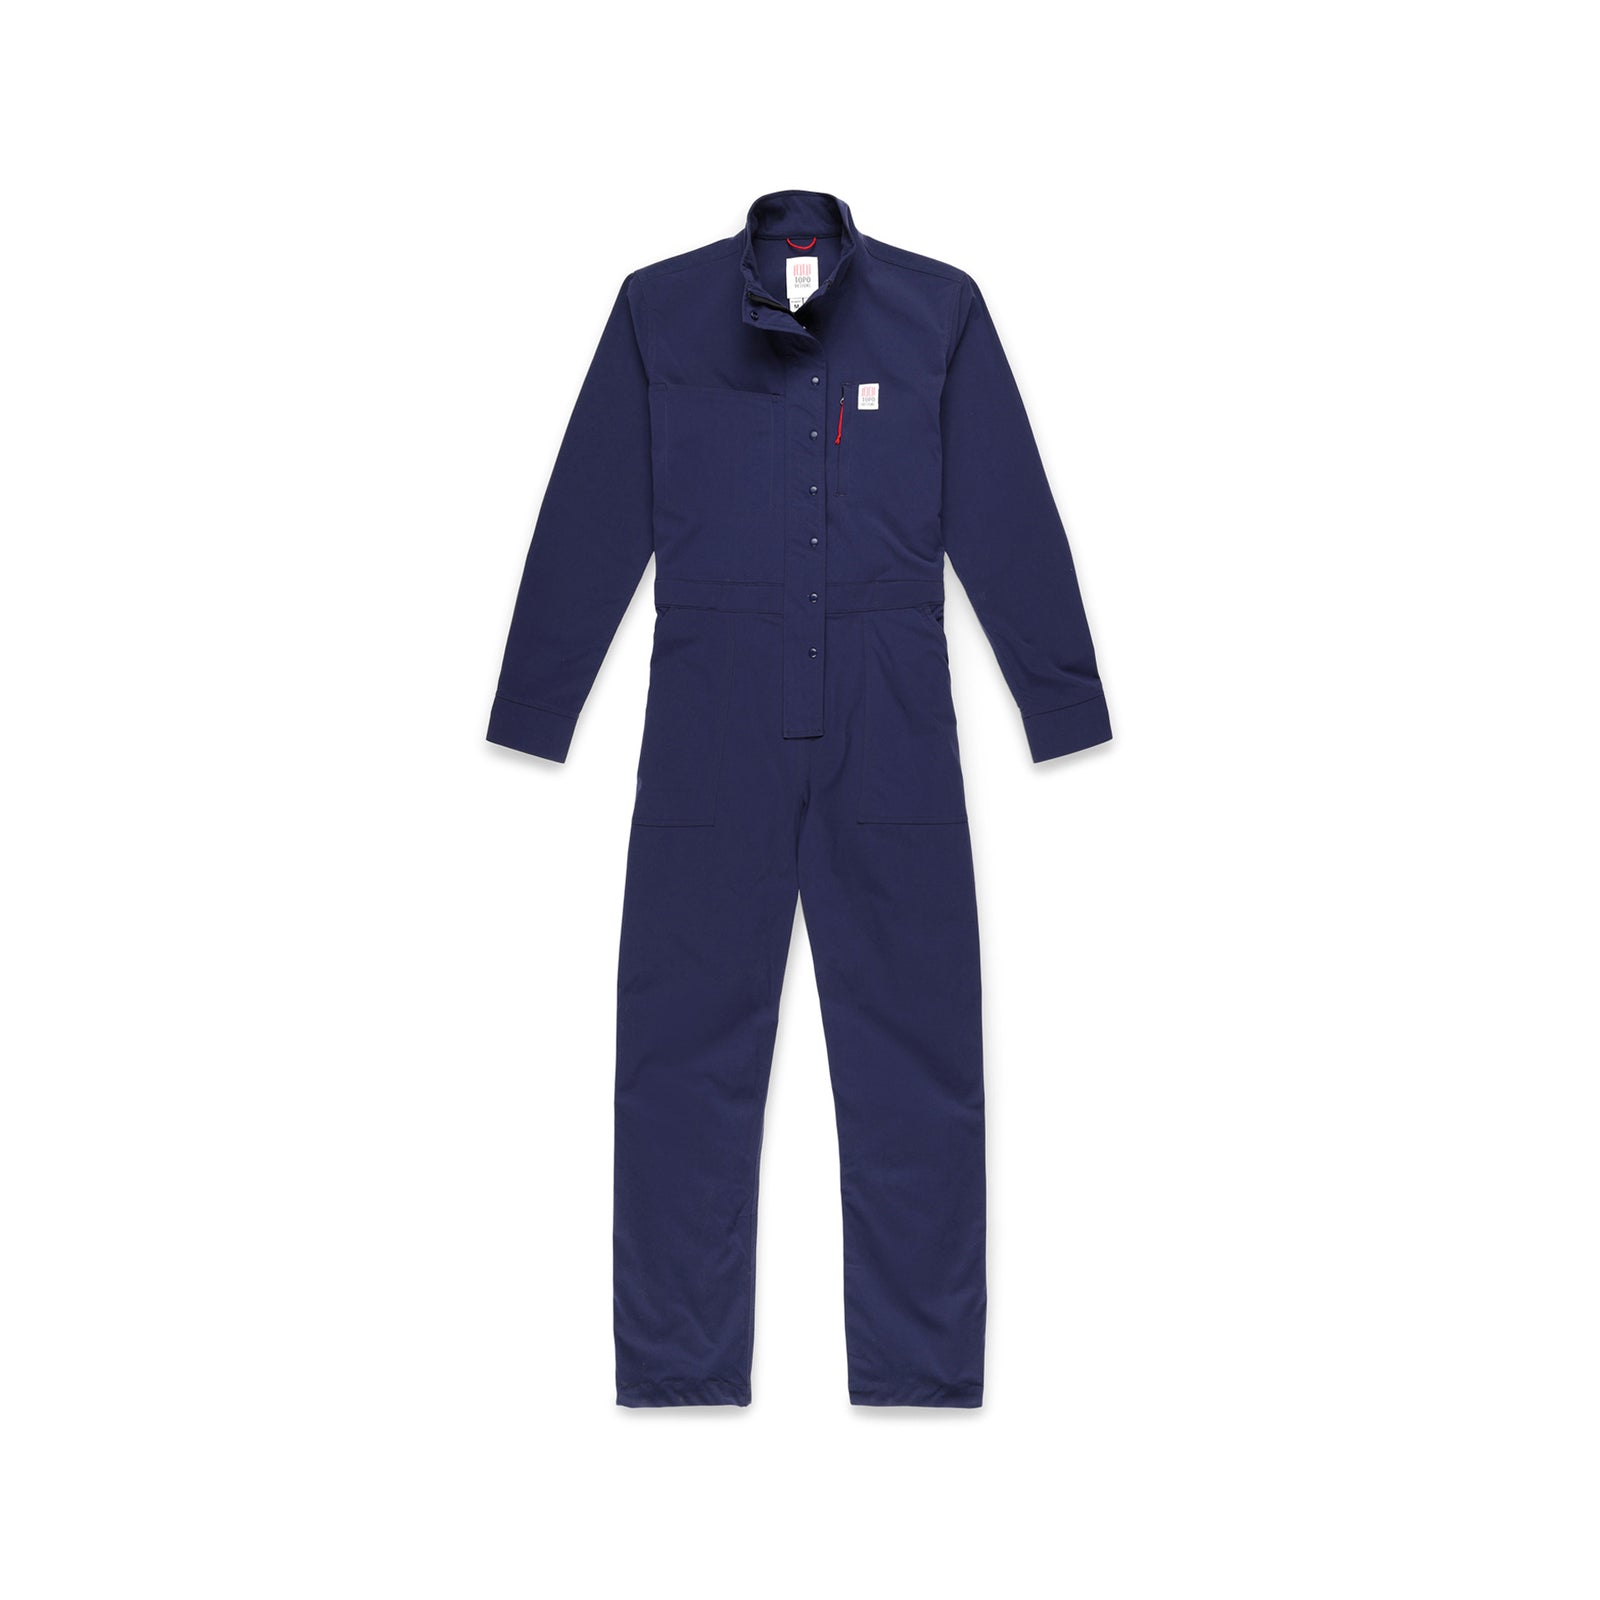 Topo Designs Women's Coverall jumpsuit in "Navy" blue.